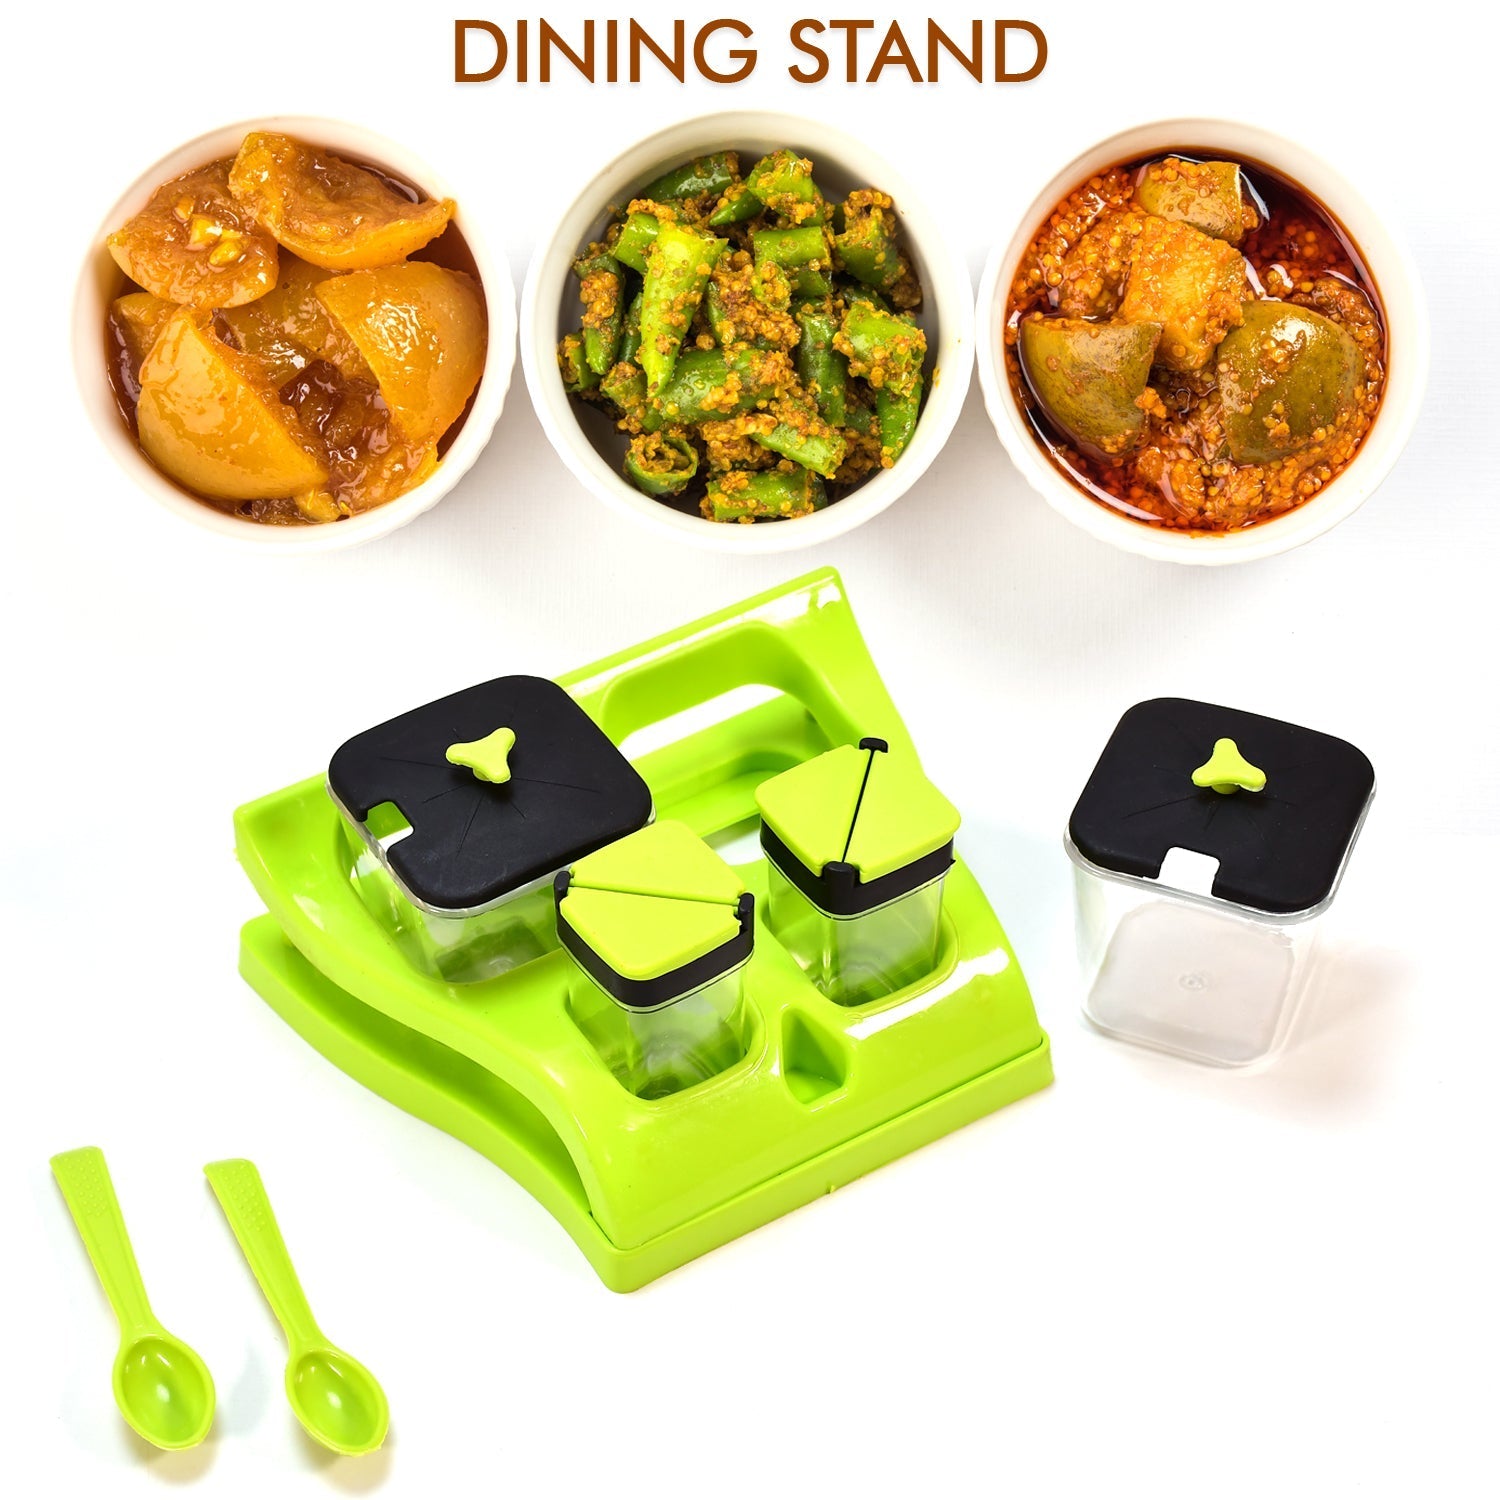 ﻿0078A Plastic Aachar pickle container/ chutney/ Mukhwas tray/ Masala tray Dinning Spice stand 